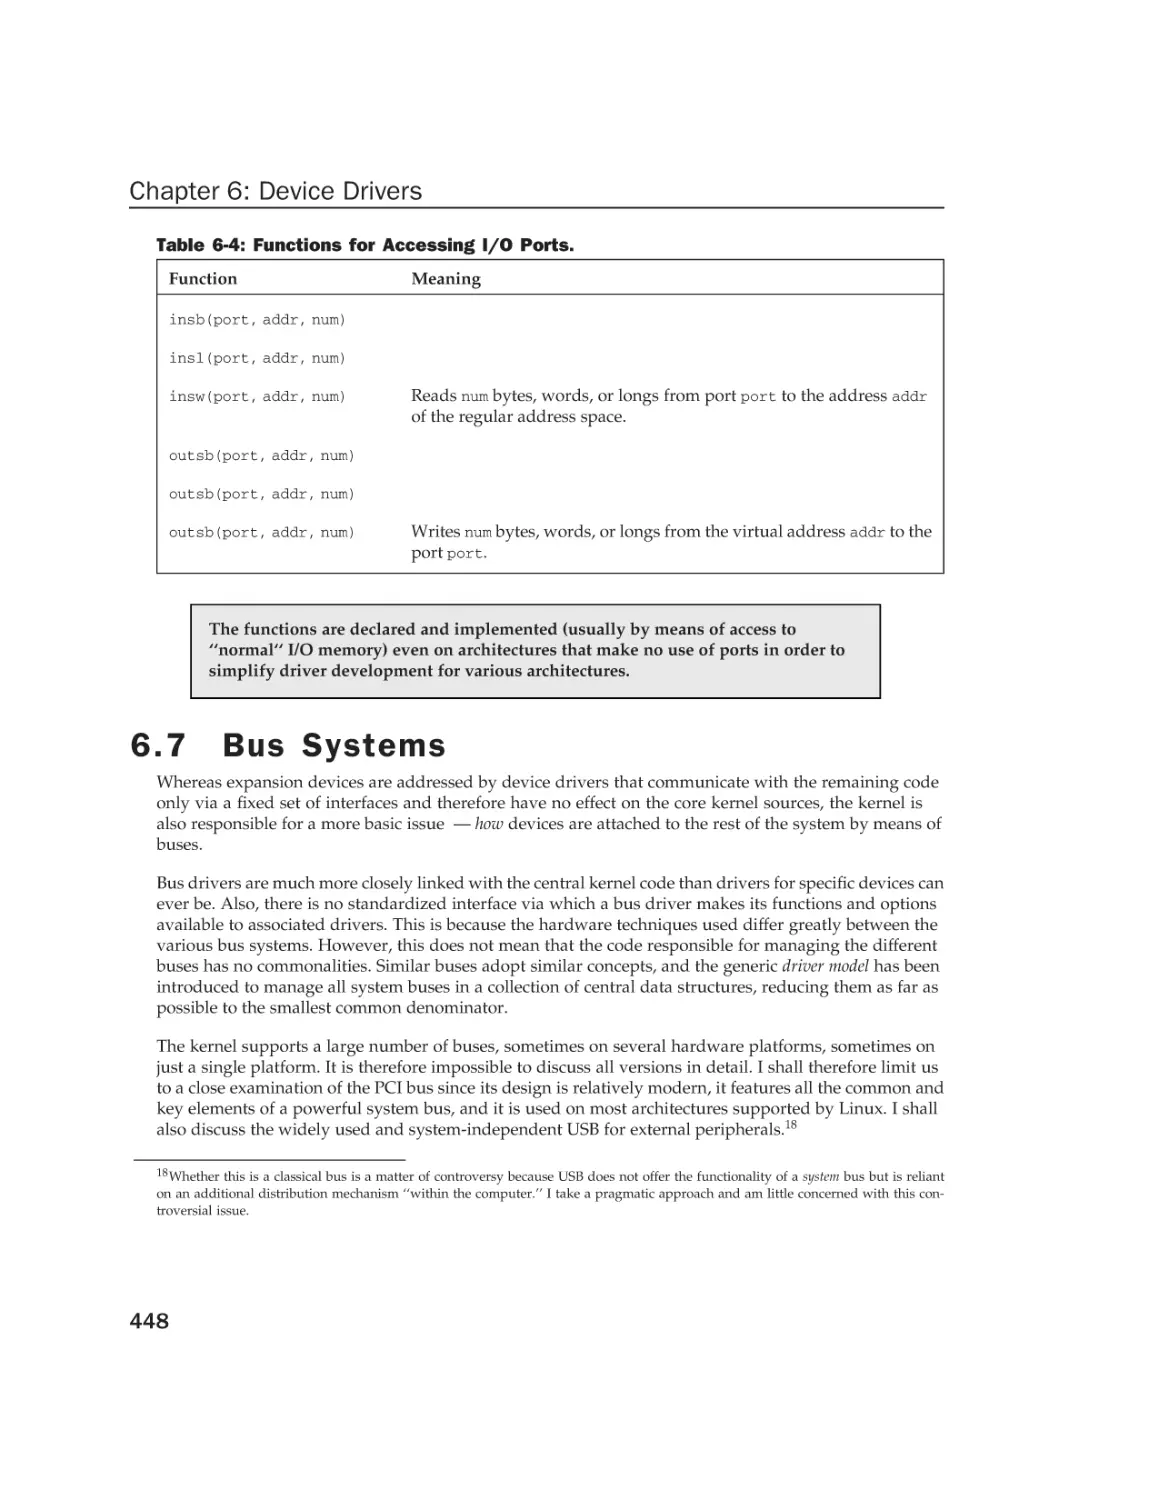 6.7 Bus Systems